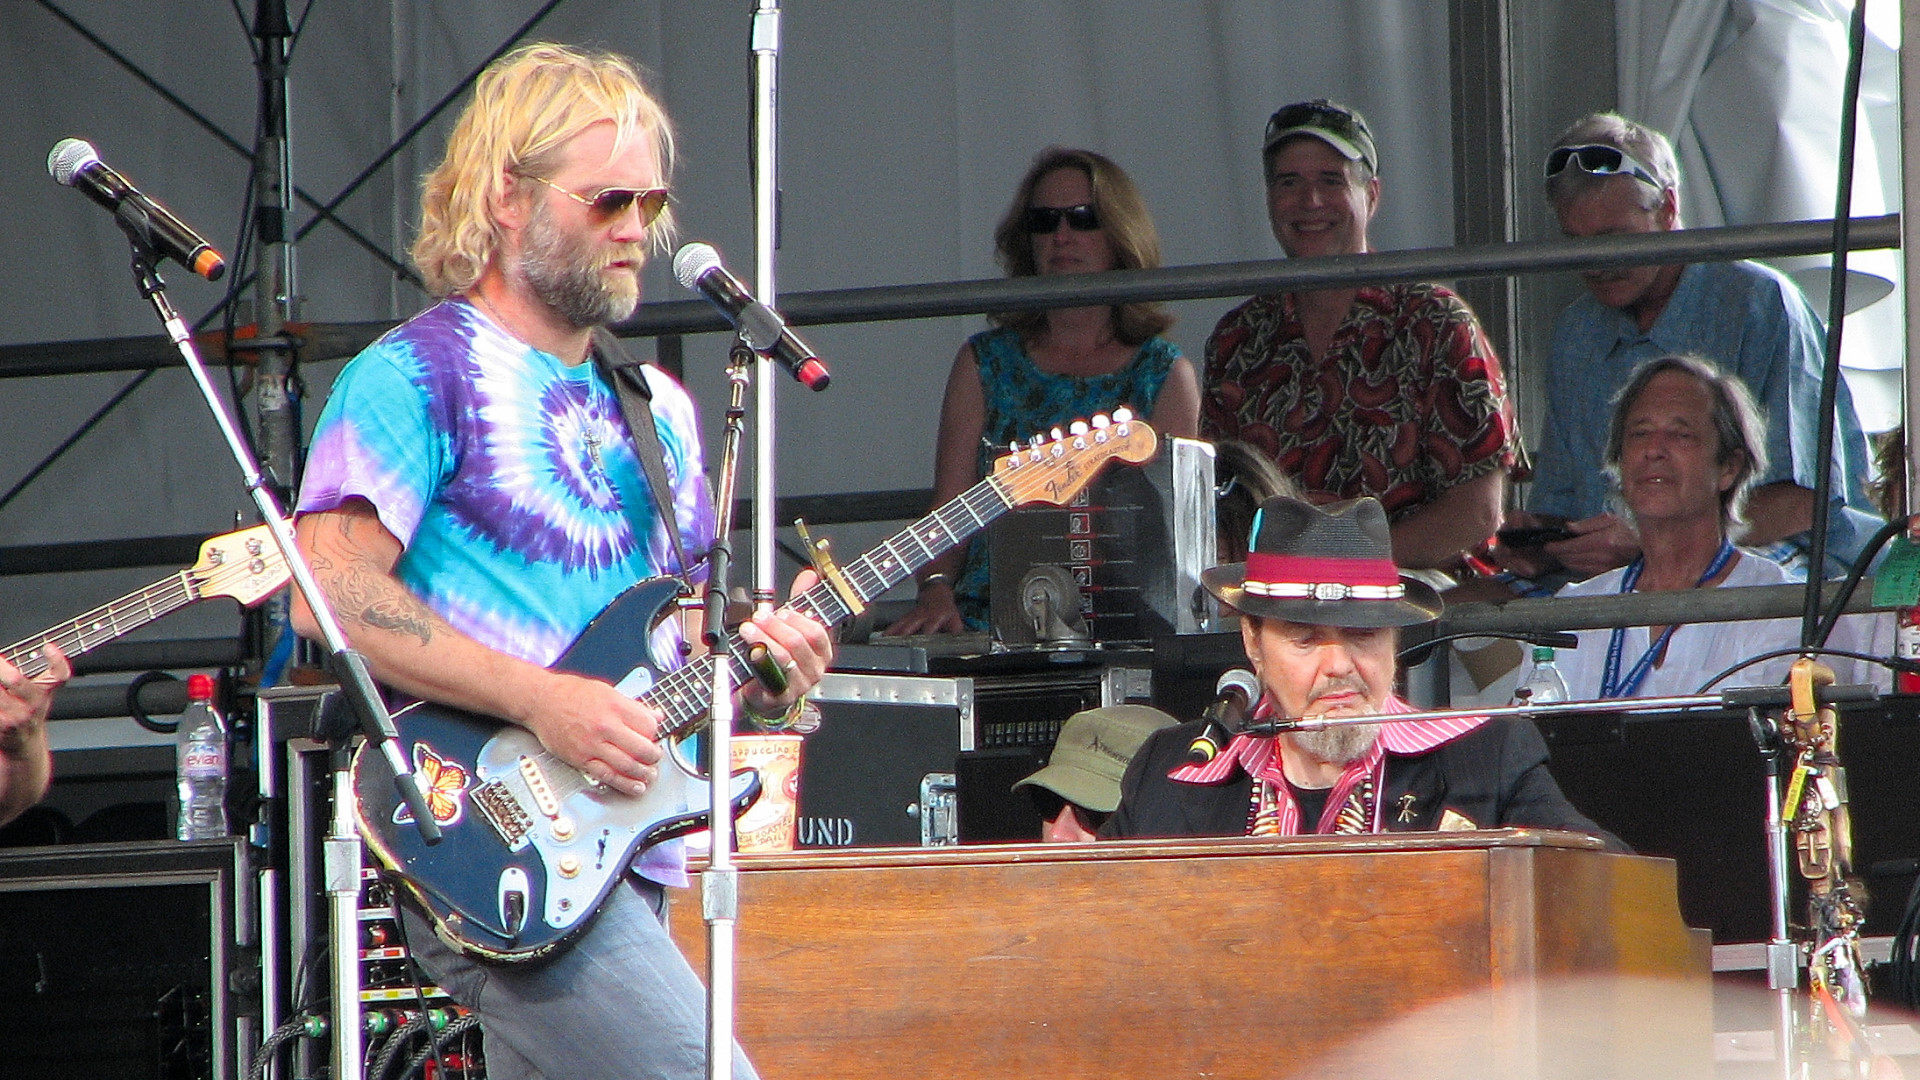 Anders Osborne on guitar and Dr. John on keyboards